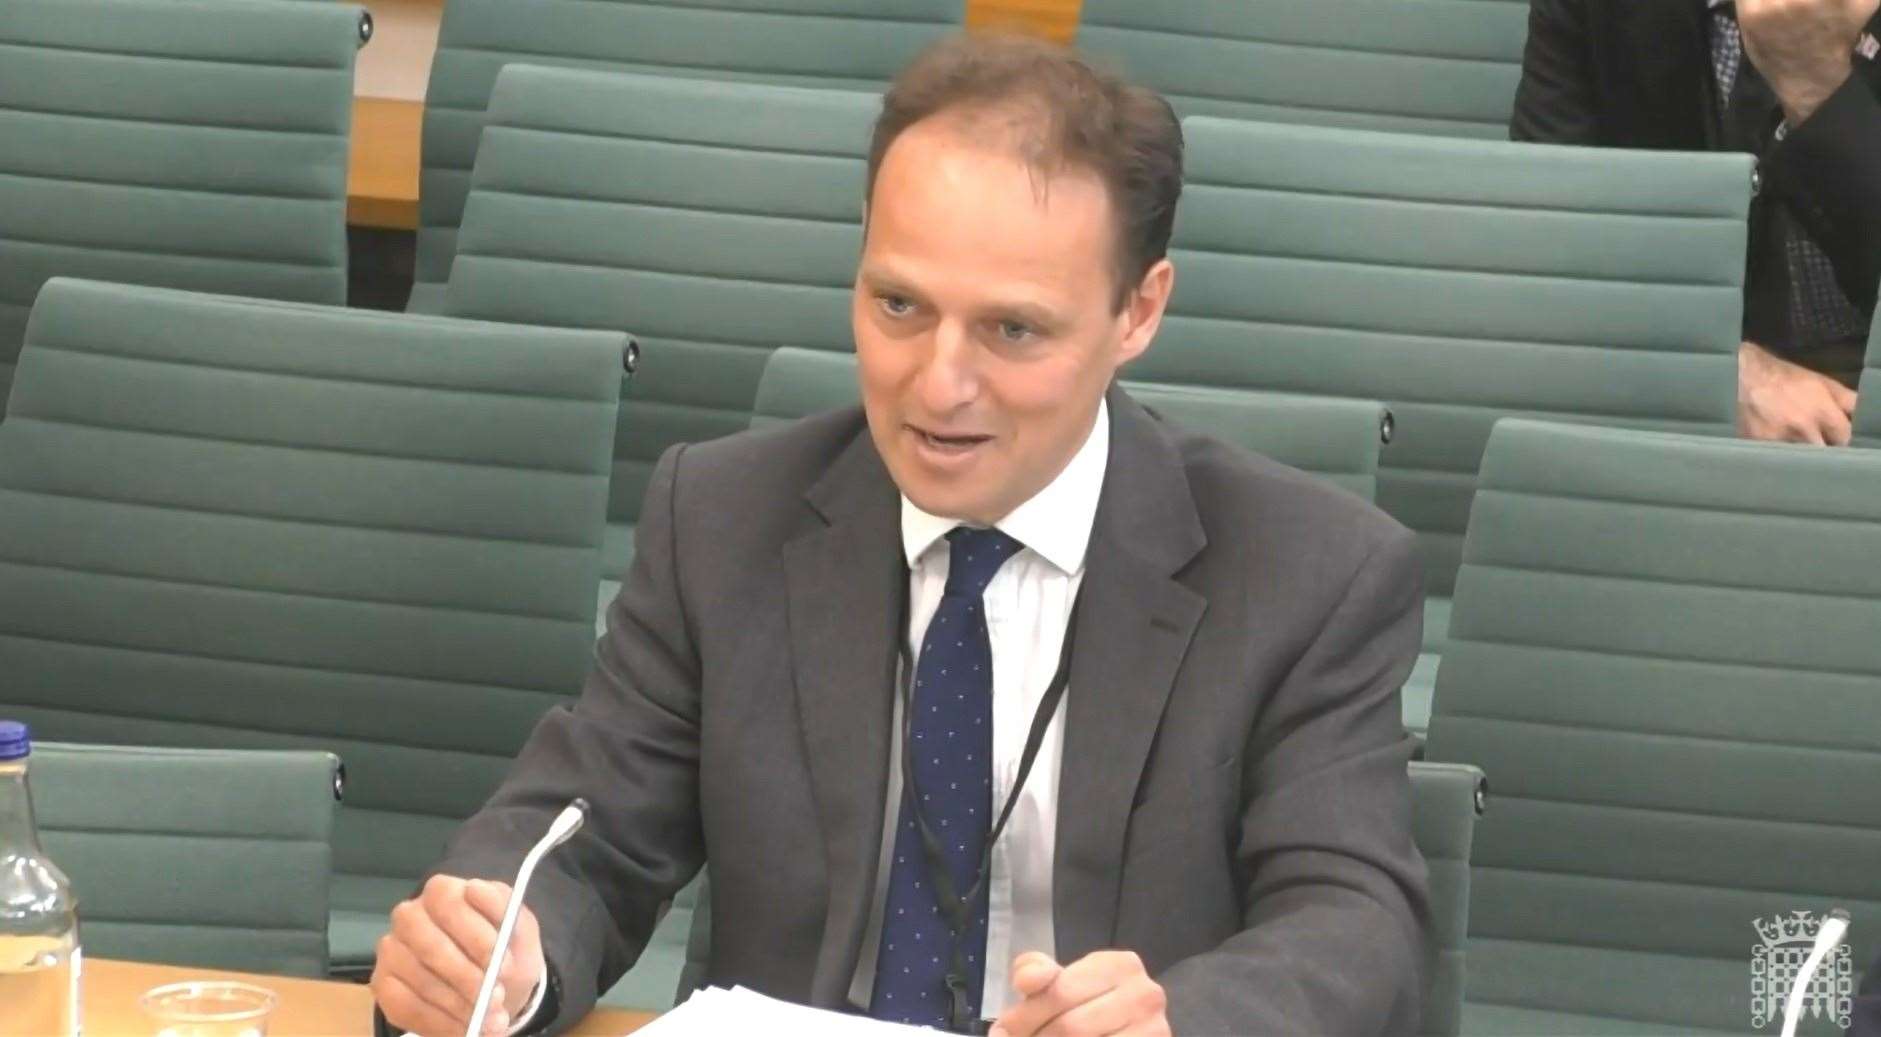 Magnus Brooke, group director of strategy, policy and regulation at ITV, gave evidence to the Culture, Media and Sport Committee (House of Commons/UK Parliament/PA)